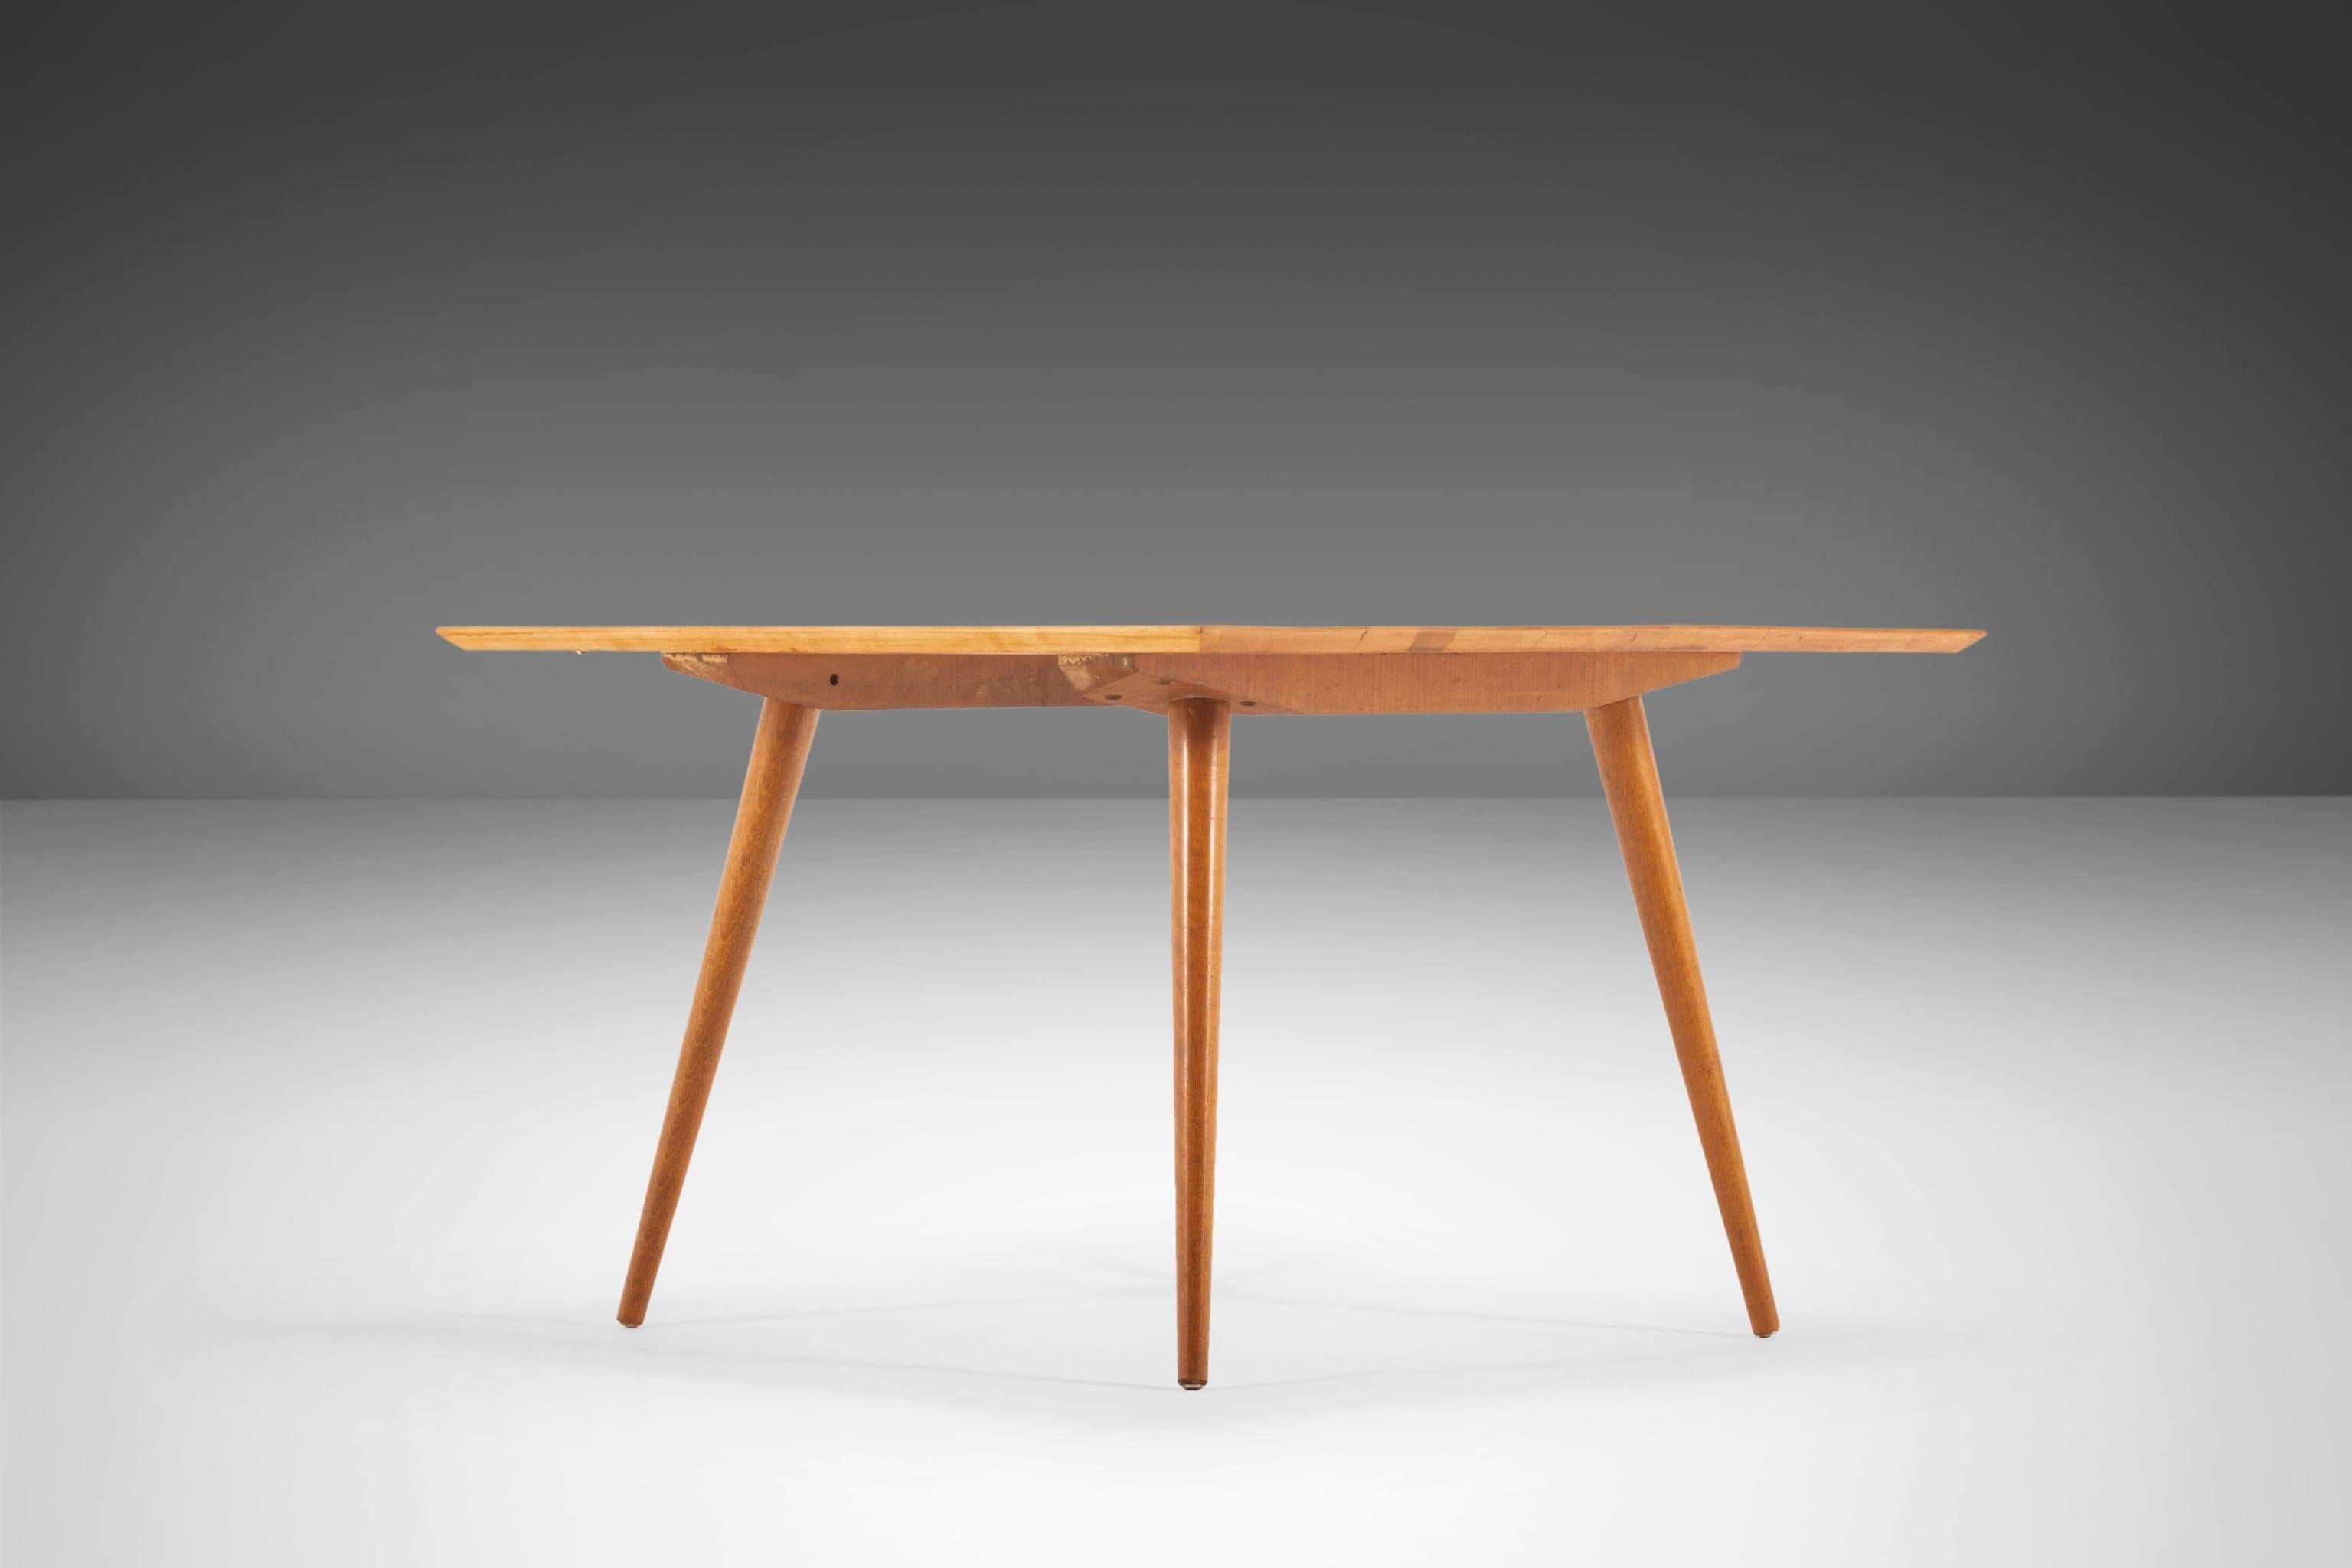 Iconic, minimal and absolutely stunning this coffee table designed by the visionary Paul McCobb for Planner Group is the quintessential archetype of American Modern design. Constructed of solid maple with exceptional wood grains, conical legs and